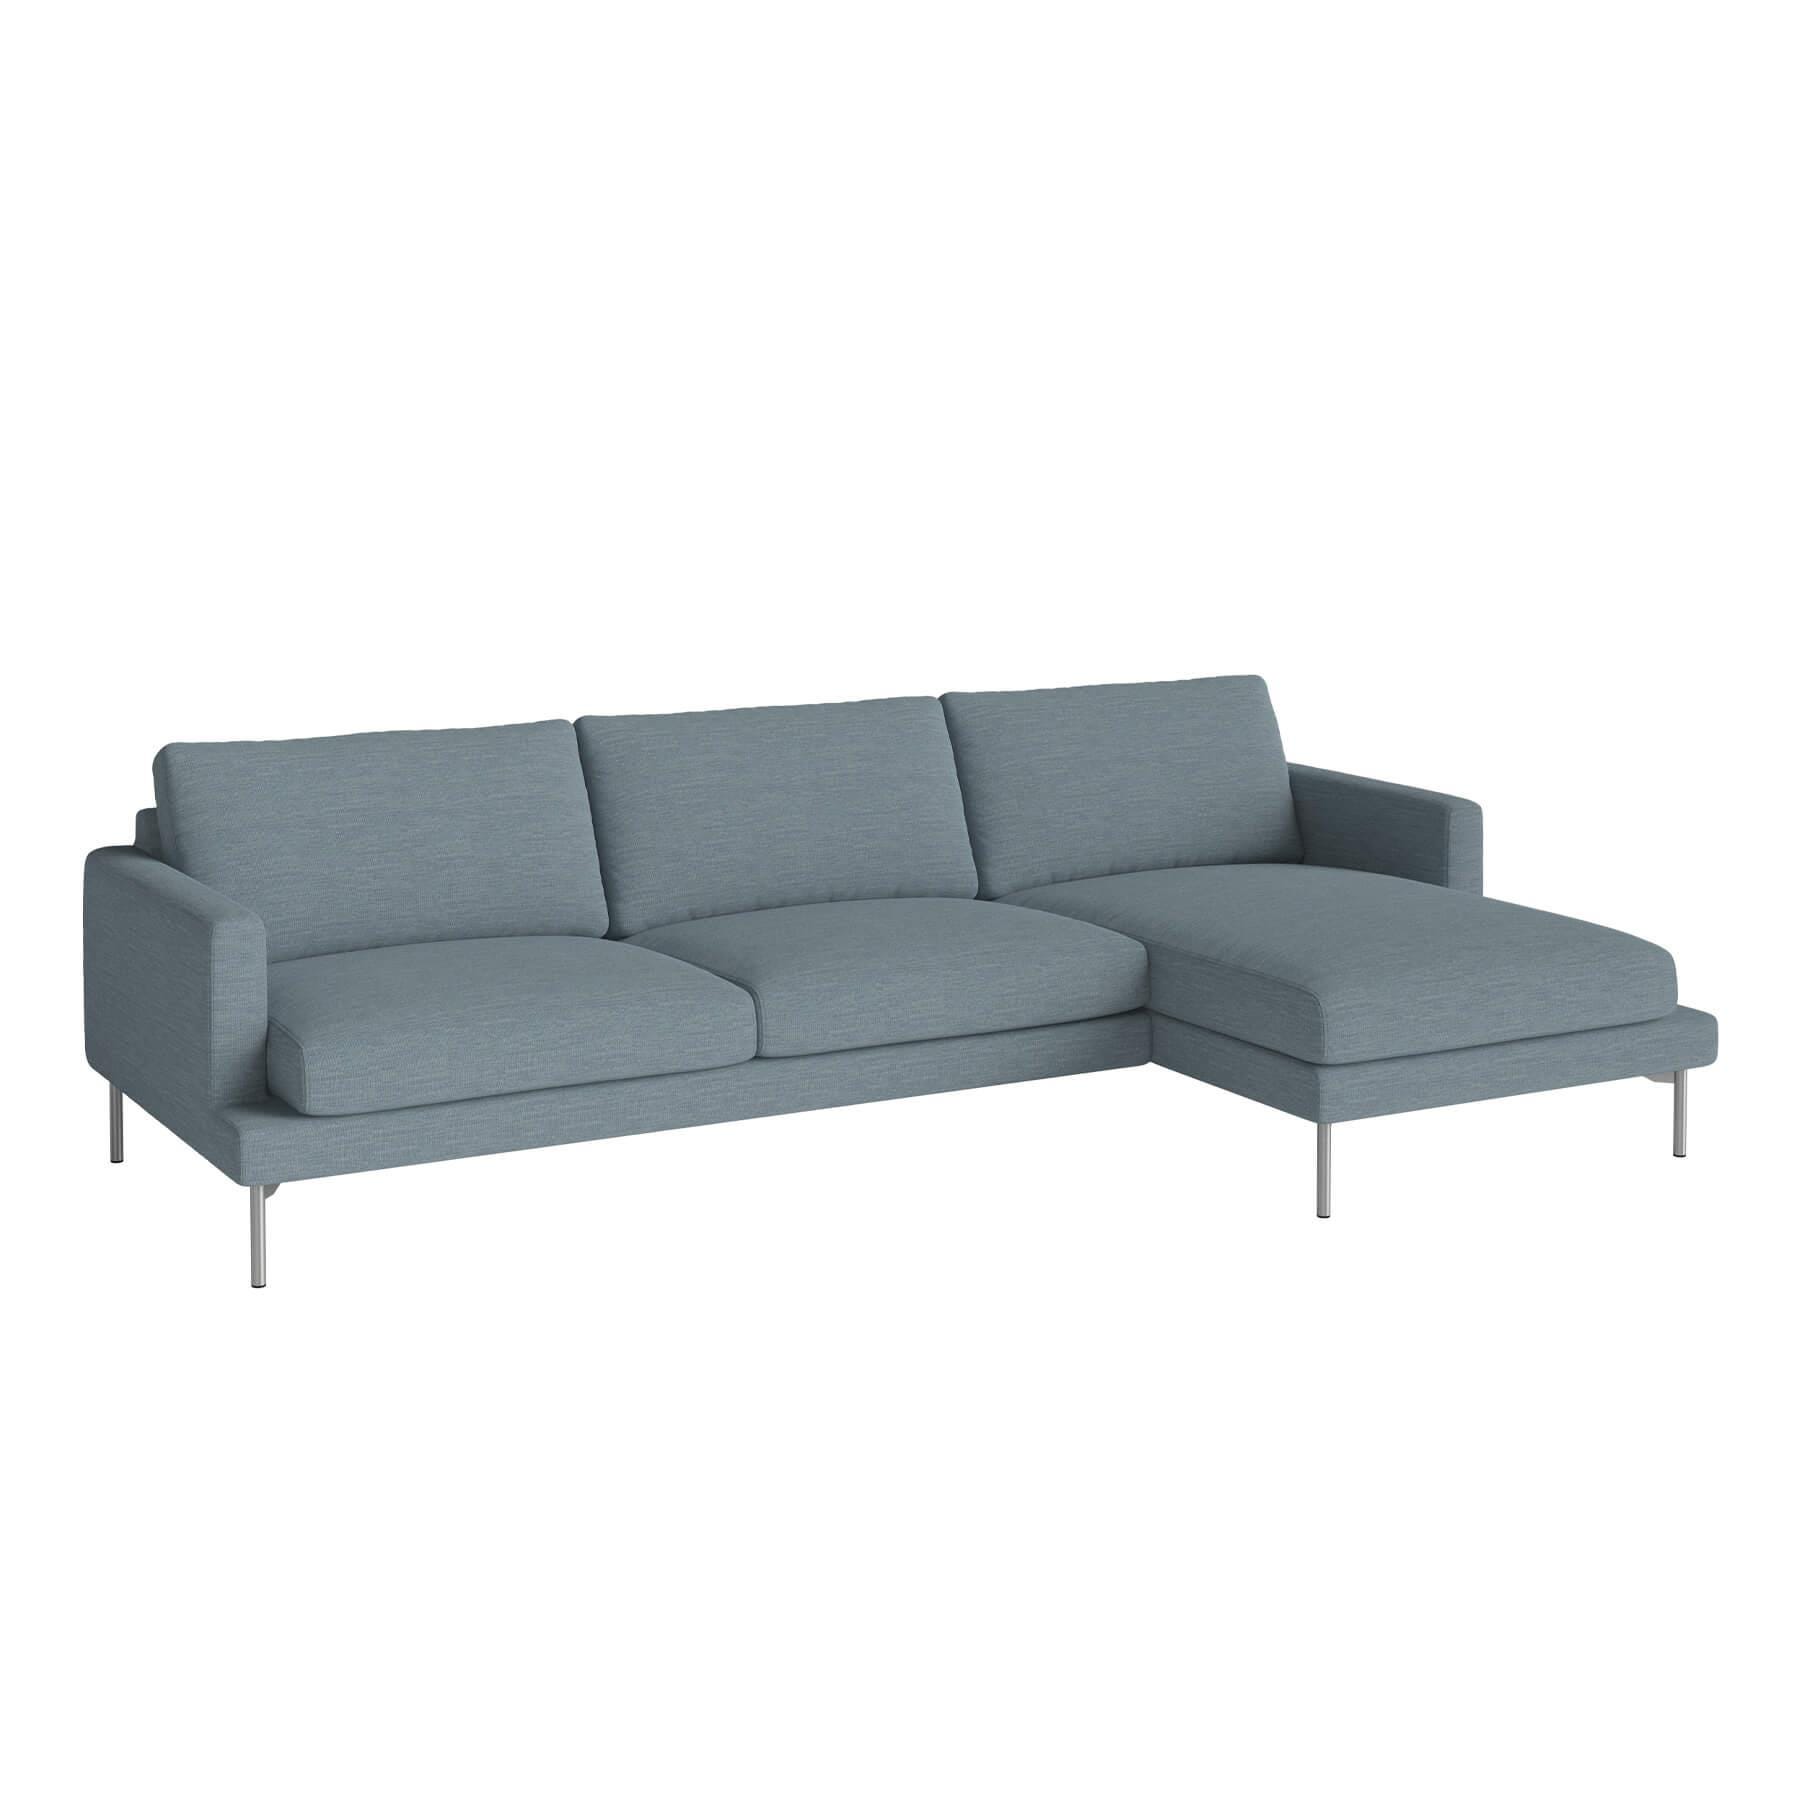 Bolia Veneda Sofa 35 Seater Sofa With Chaise Longue Brushed Steel Laine Light Blue Right Blue Designer Furniture From Holloways Of Ludlow